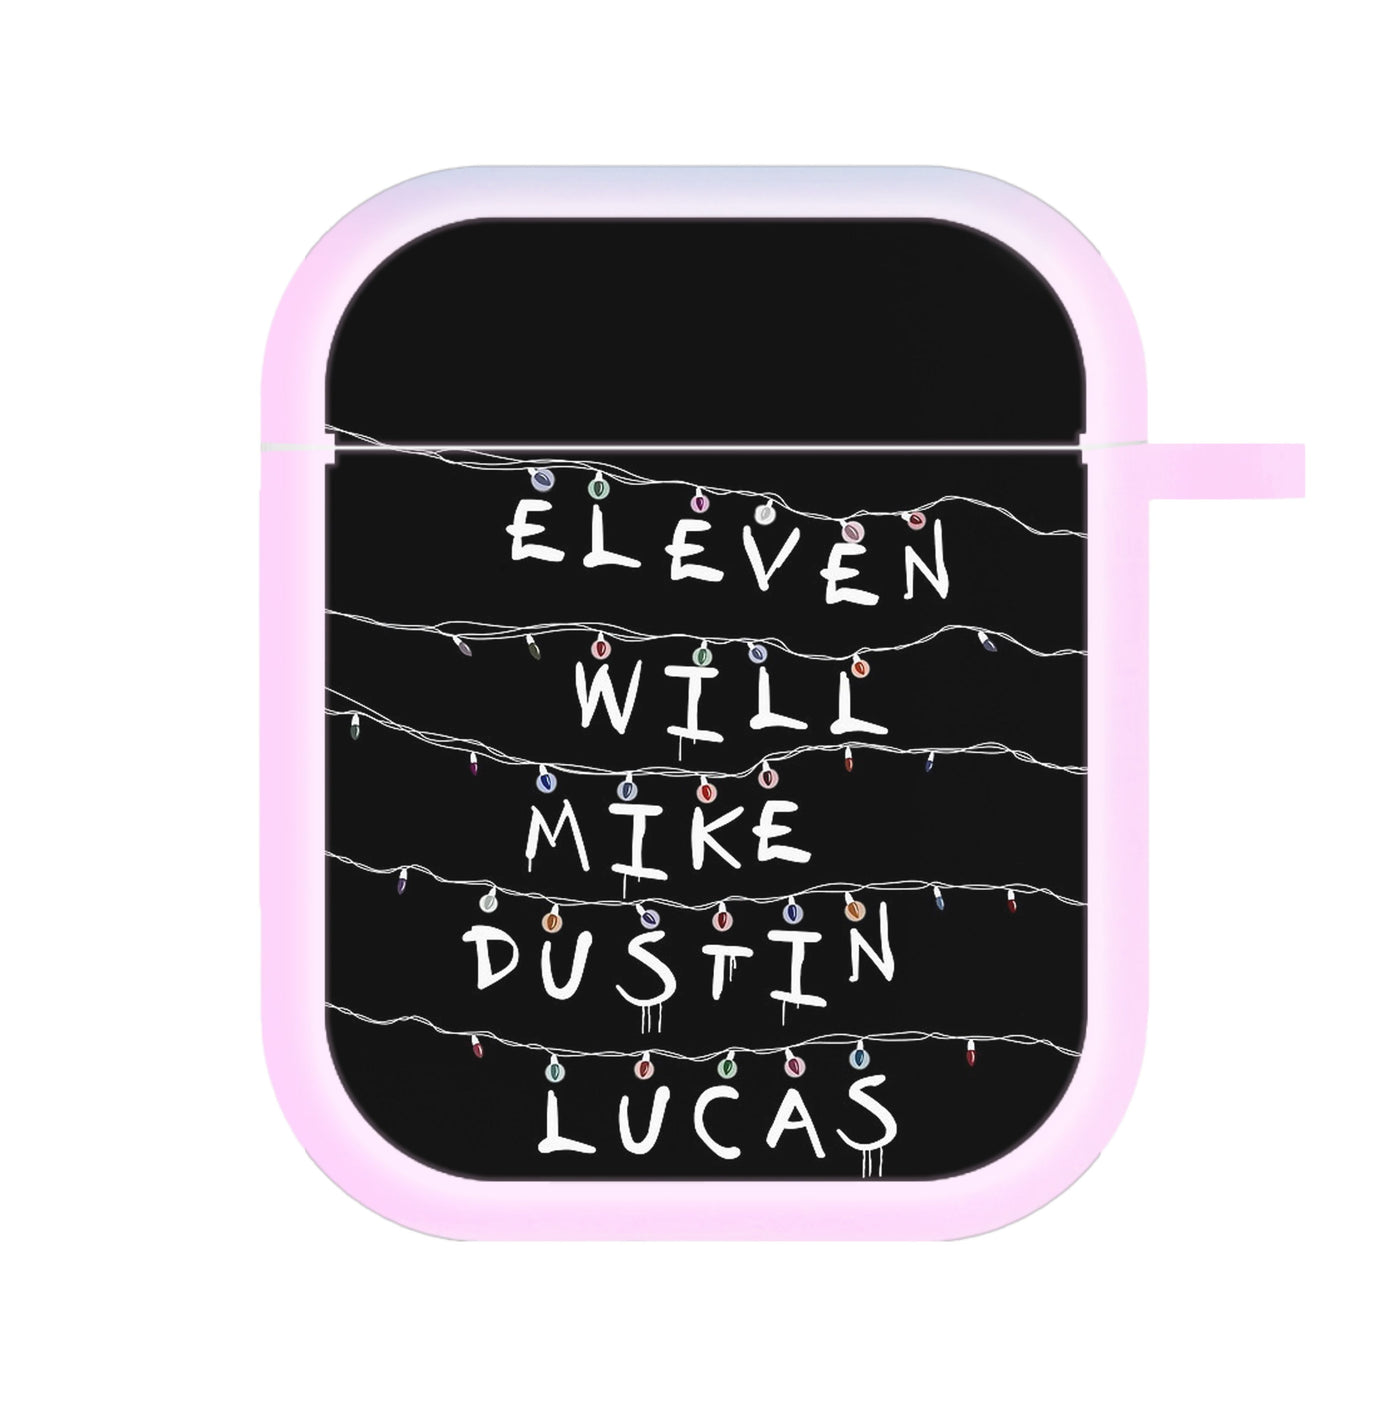 Eleven, Will, Mike, Dustin & Lucas - Stranger Things AirPods Case